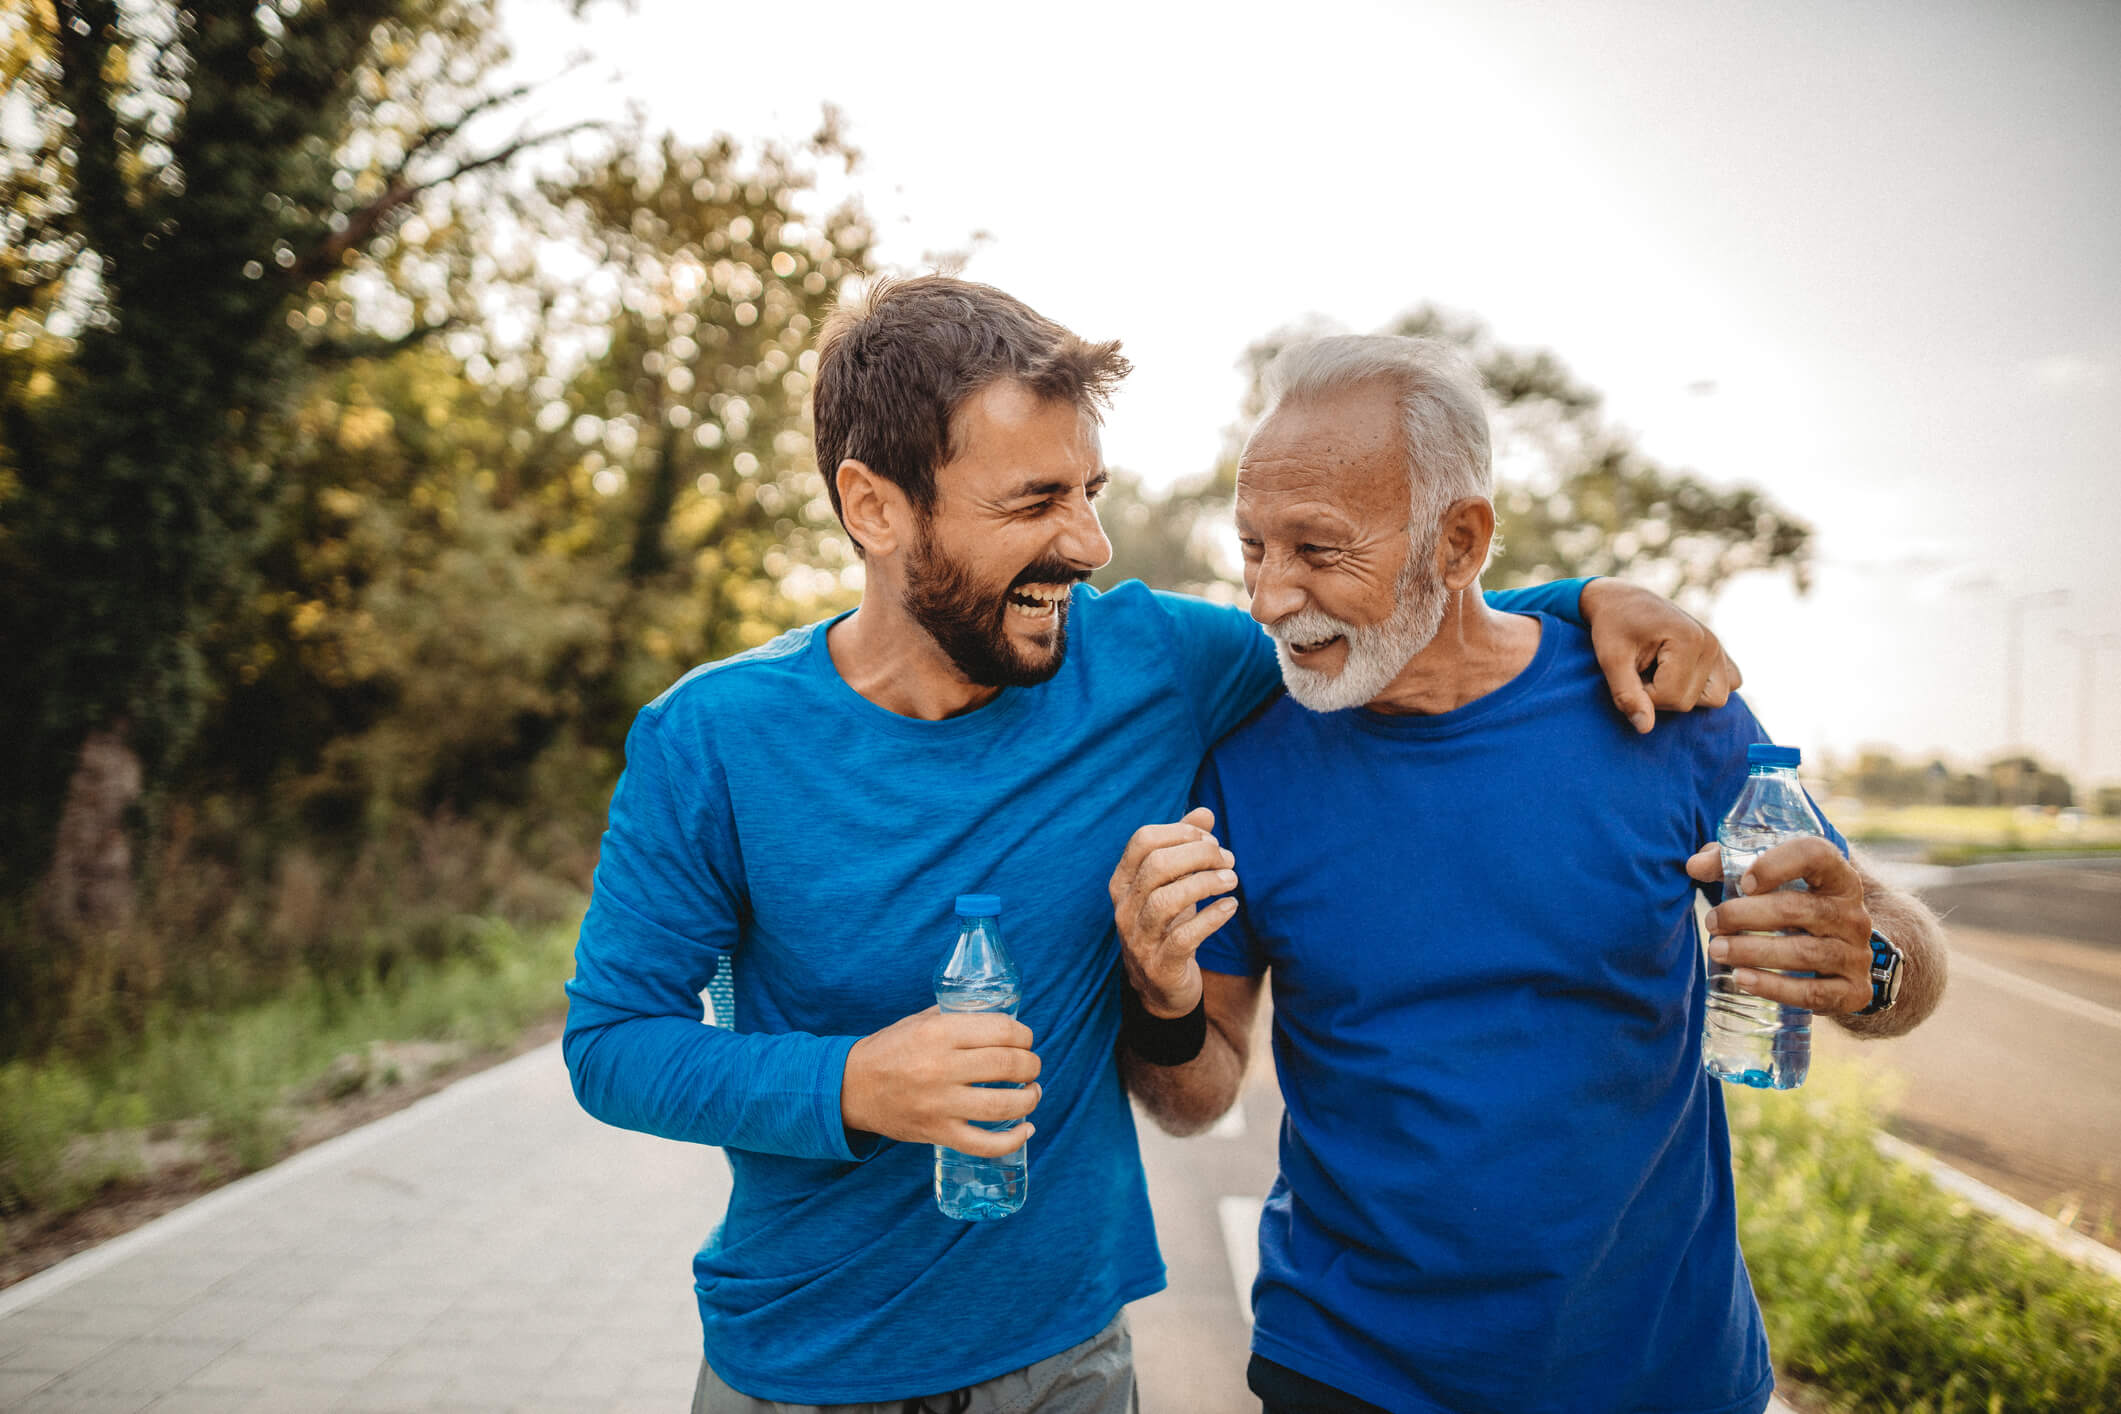 5 Great Ways to Stay Connected with a Loved One in an Assisted Living Community